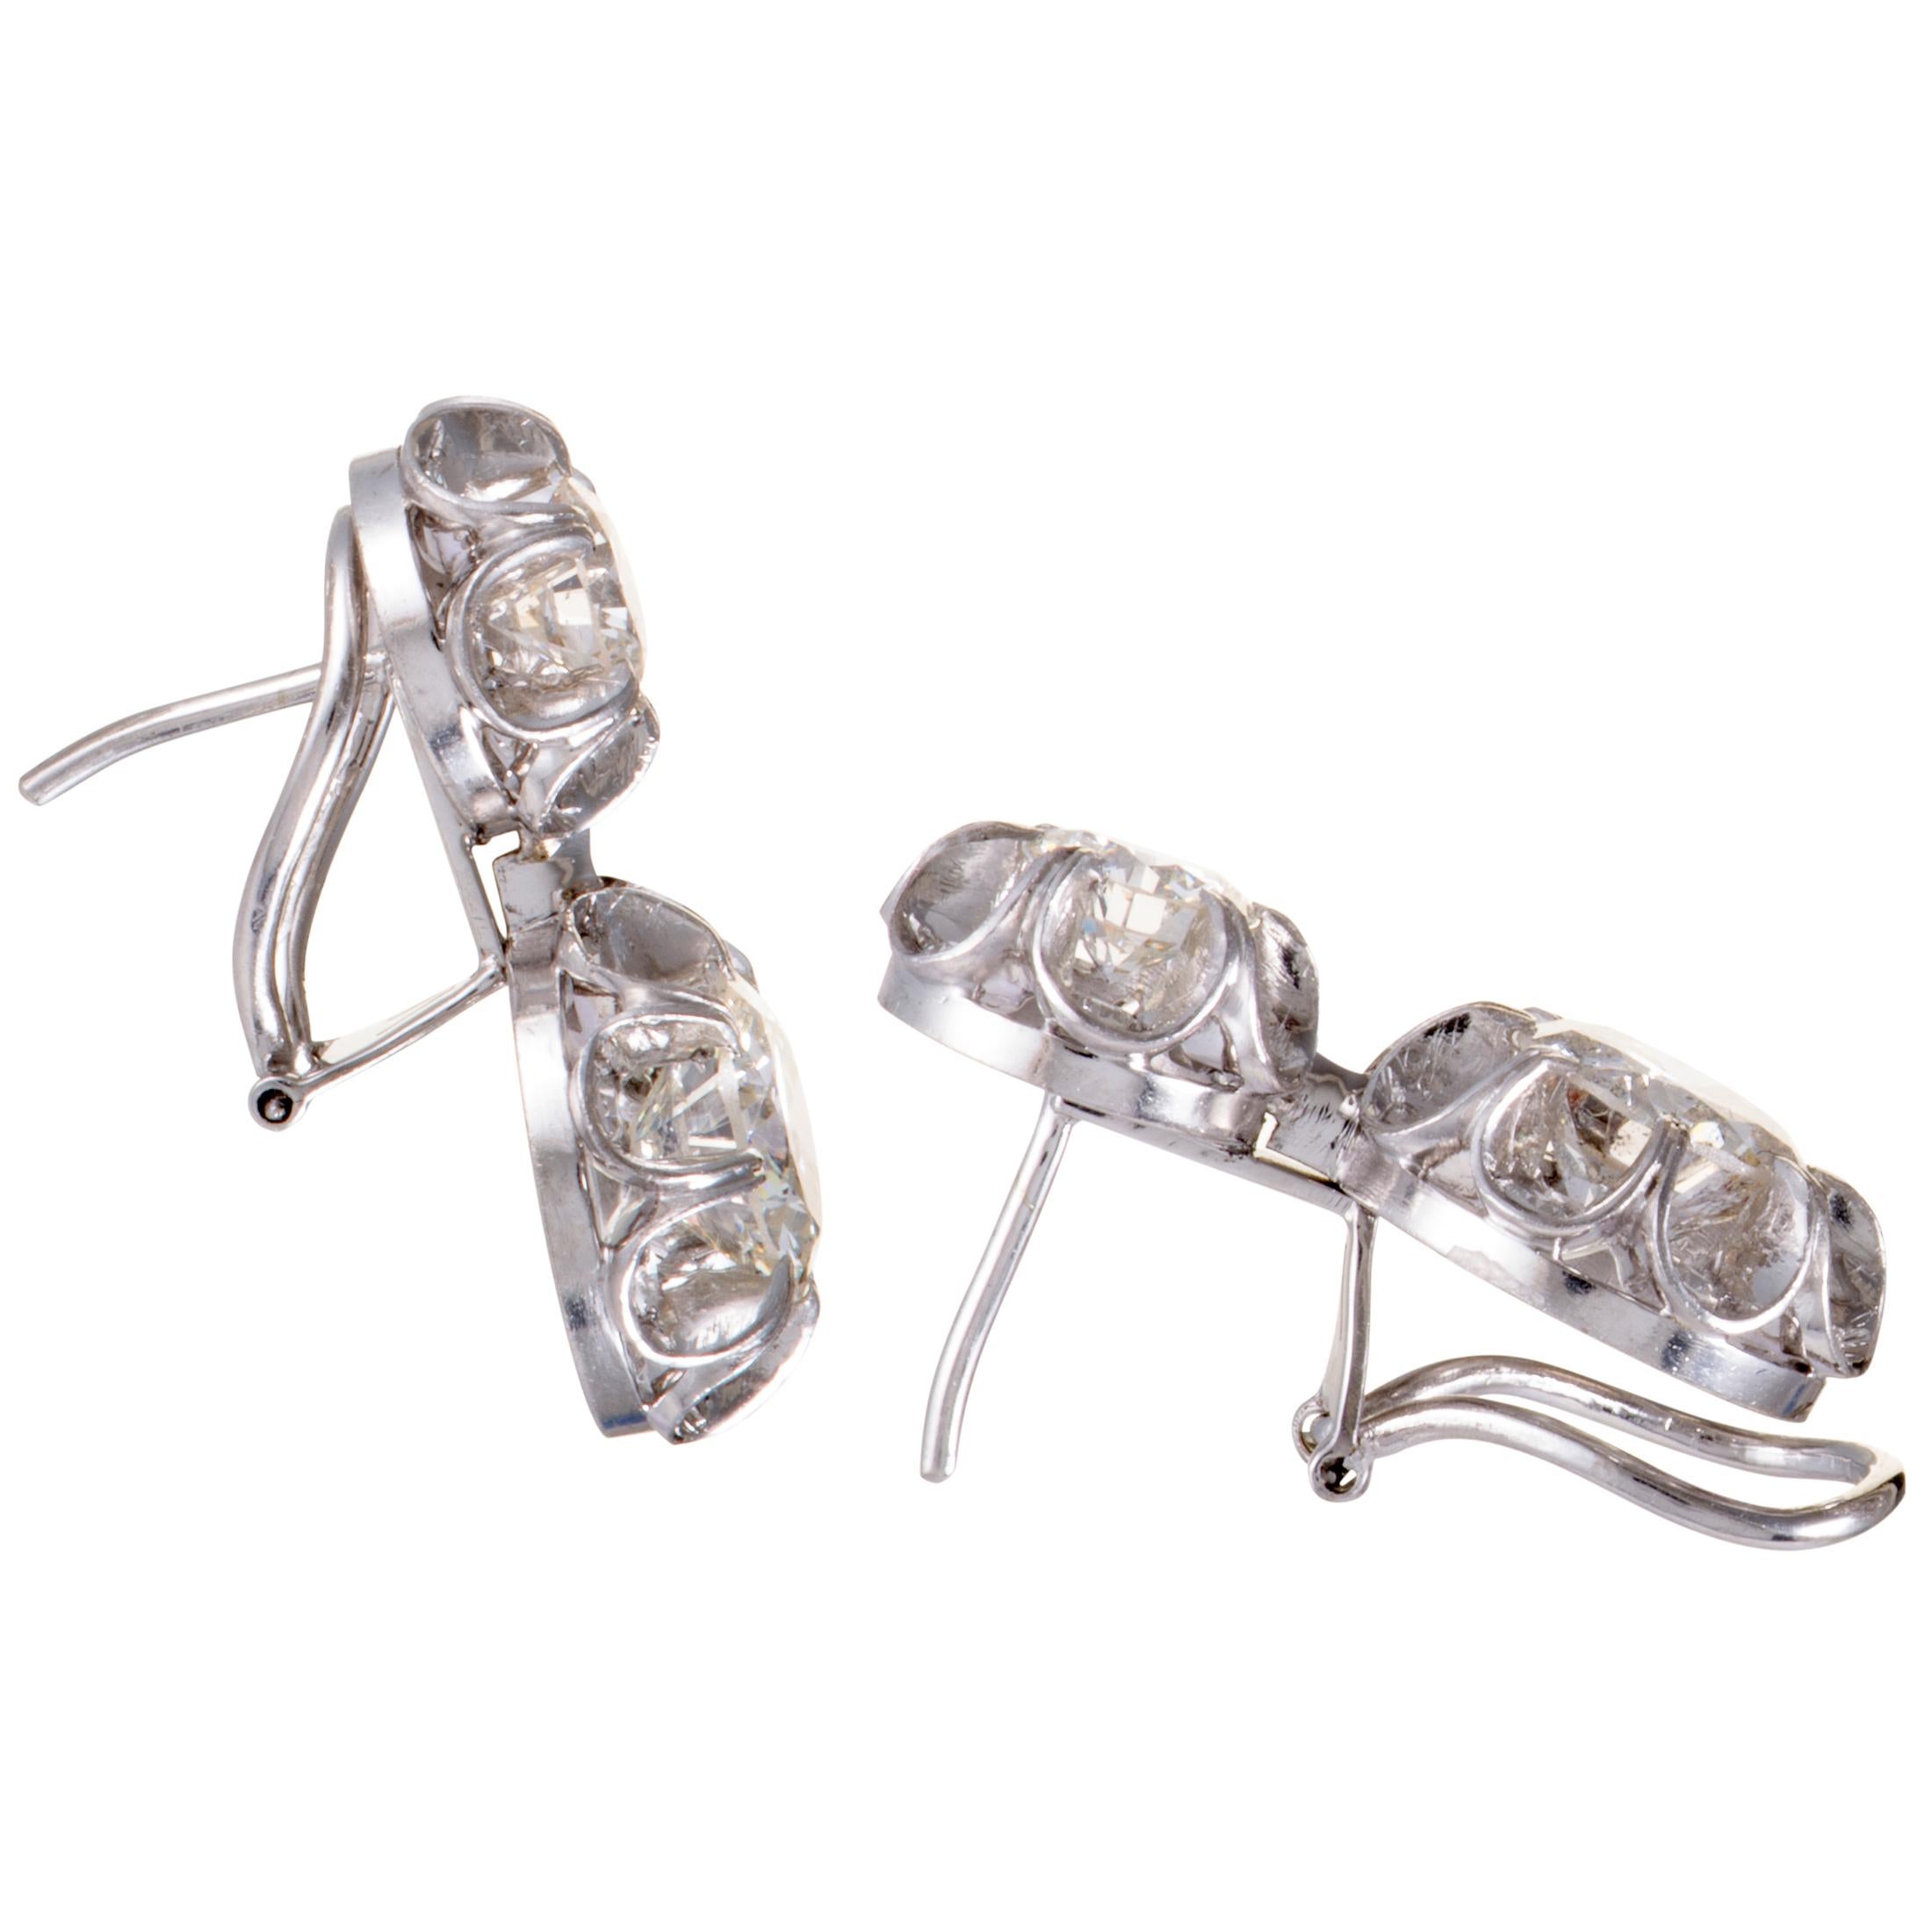 Designed in a wonderfully classic manner and lavishly decorated with luxuriously resplendent diamonds, these stunning 18K white gold earrings offer an exceptionally splendid look of refined sophistication. The pair boasts a total of 0.90 carats of